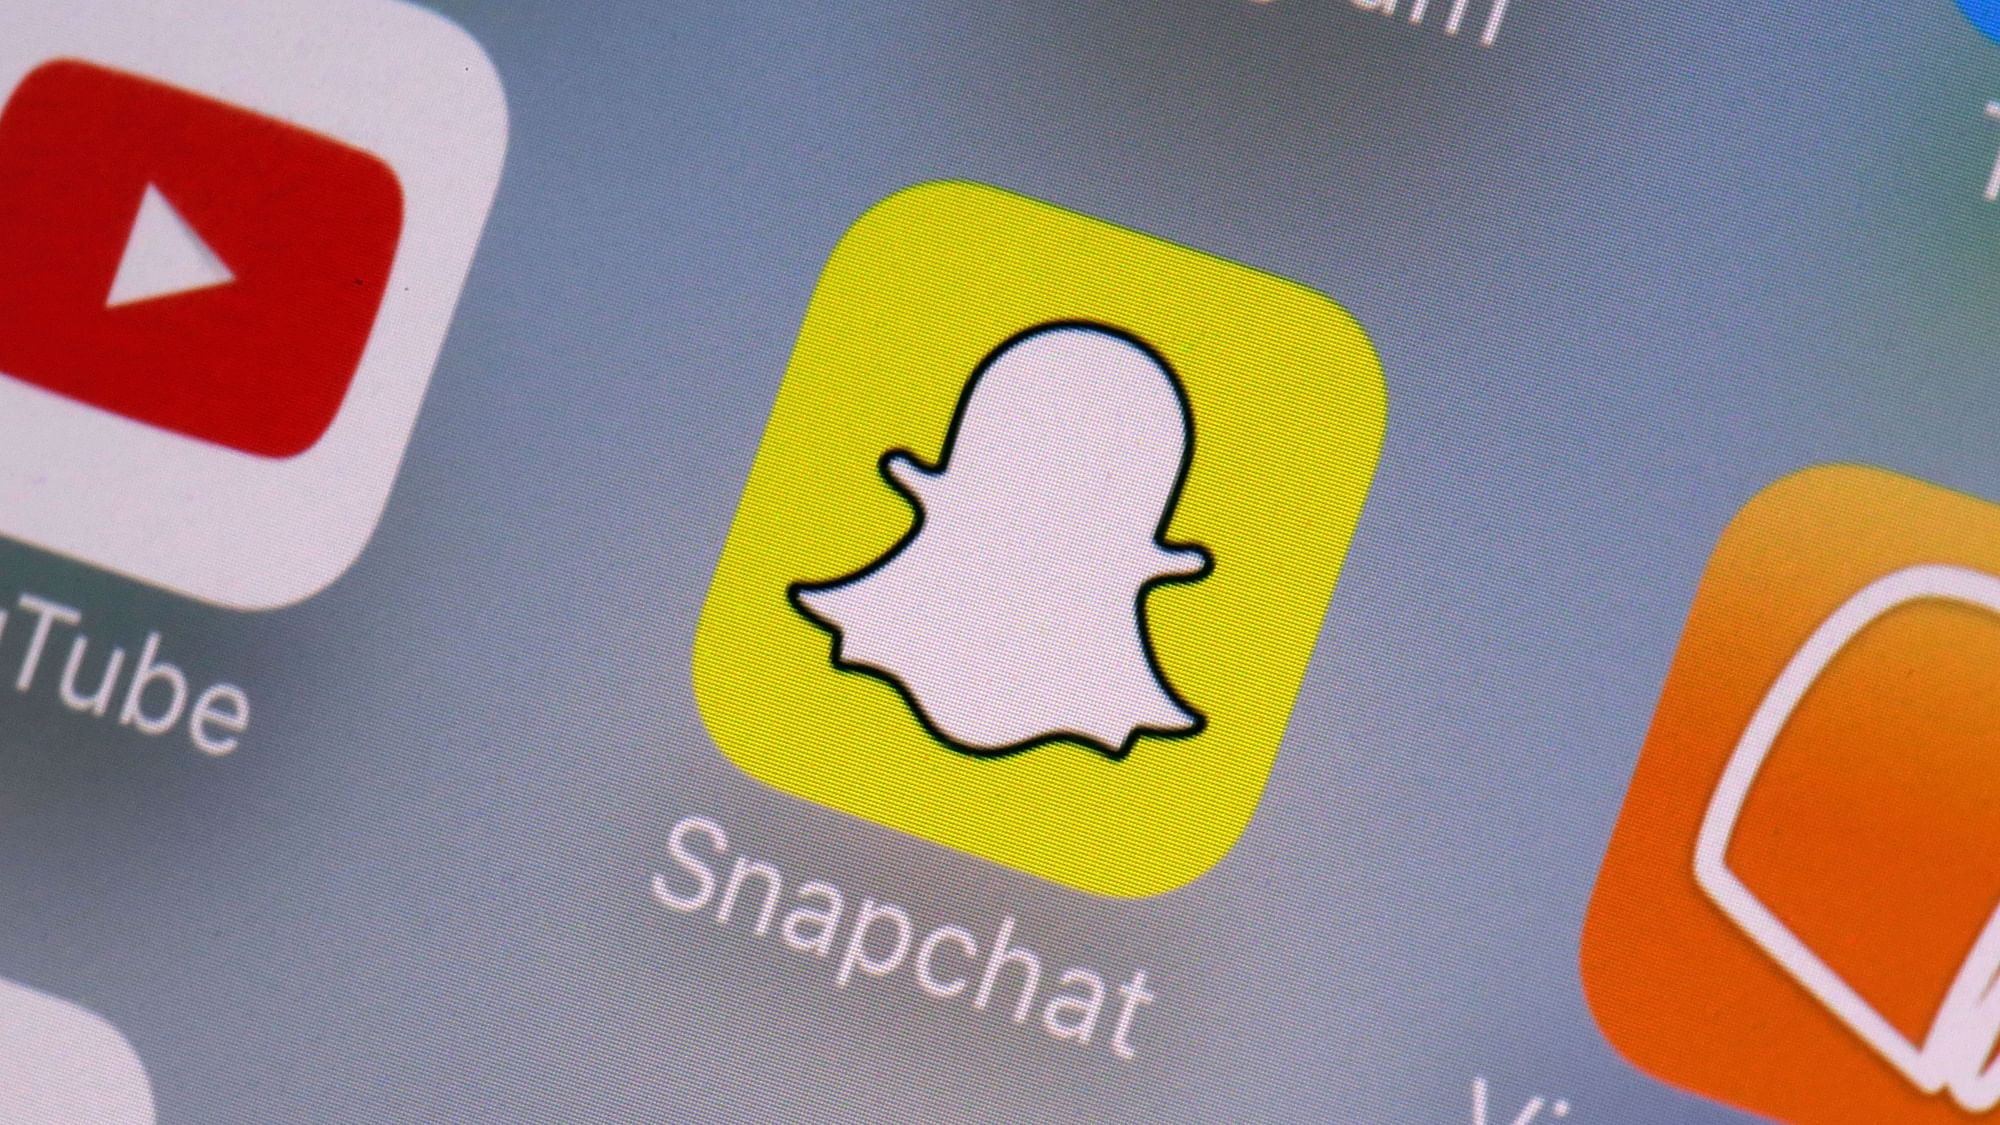 Snapchat is making original shows for mobile now.